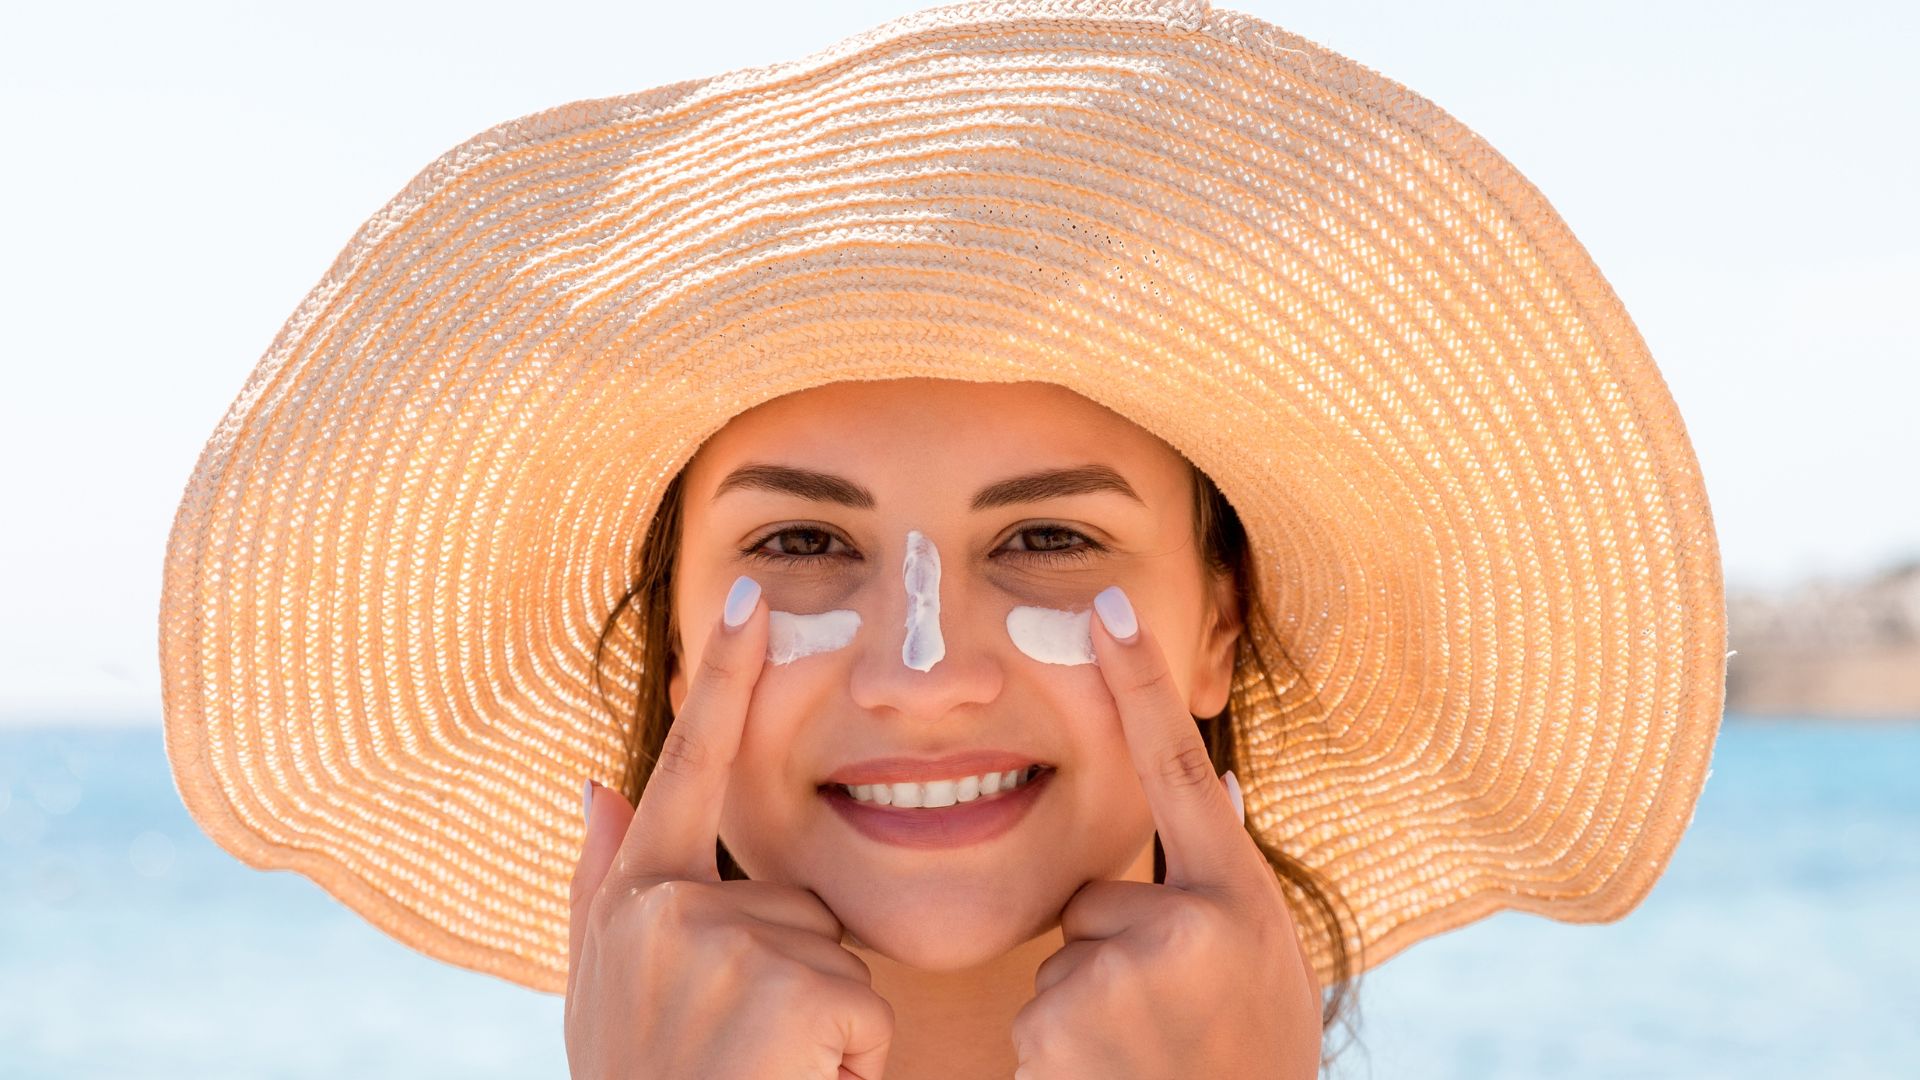 What to look for in your sunscreen?